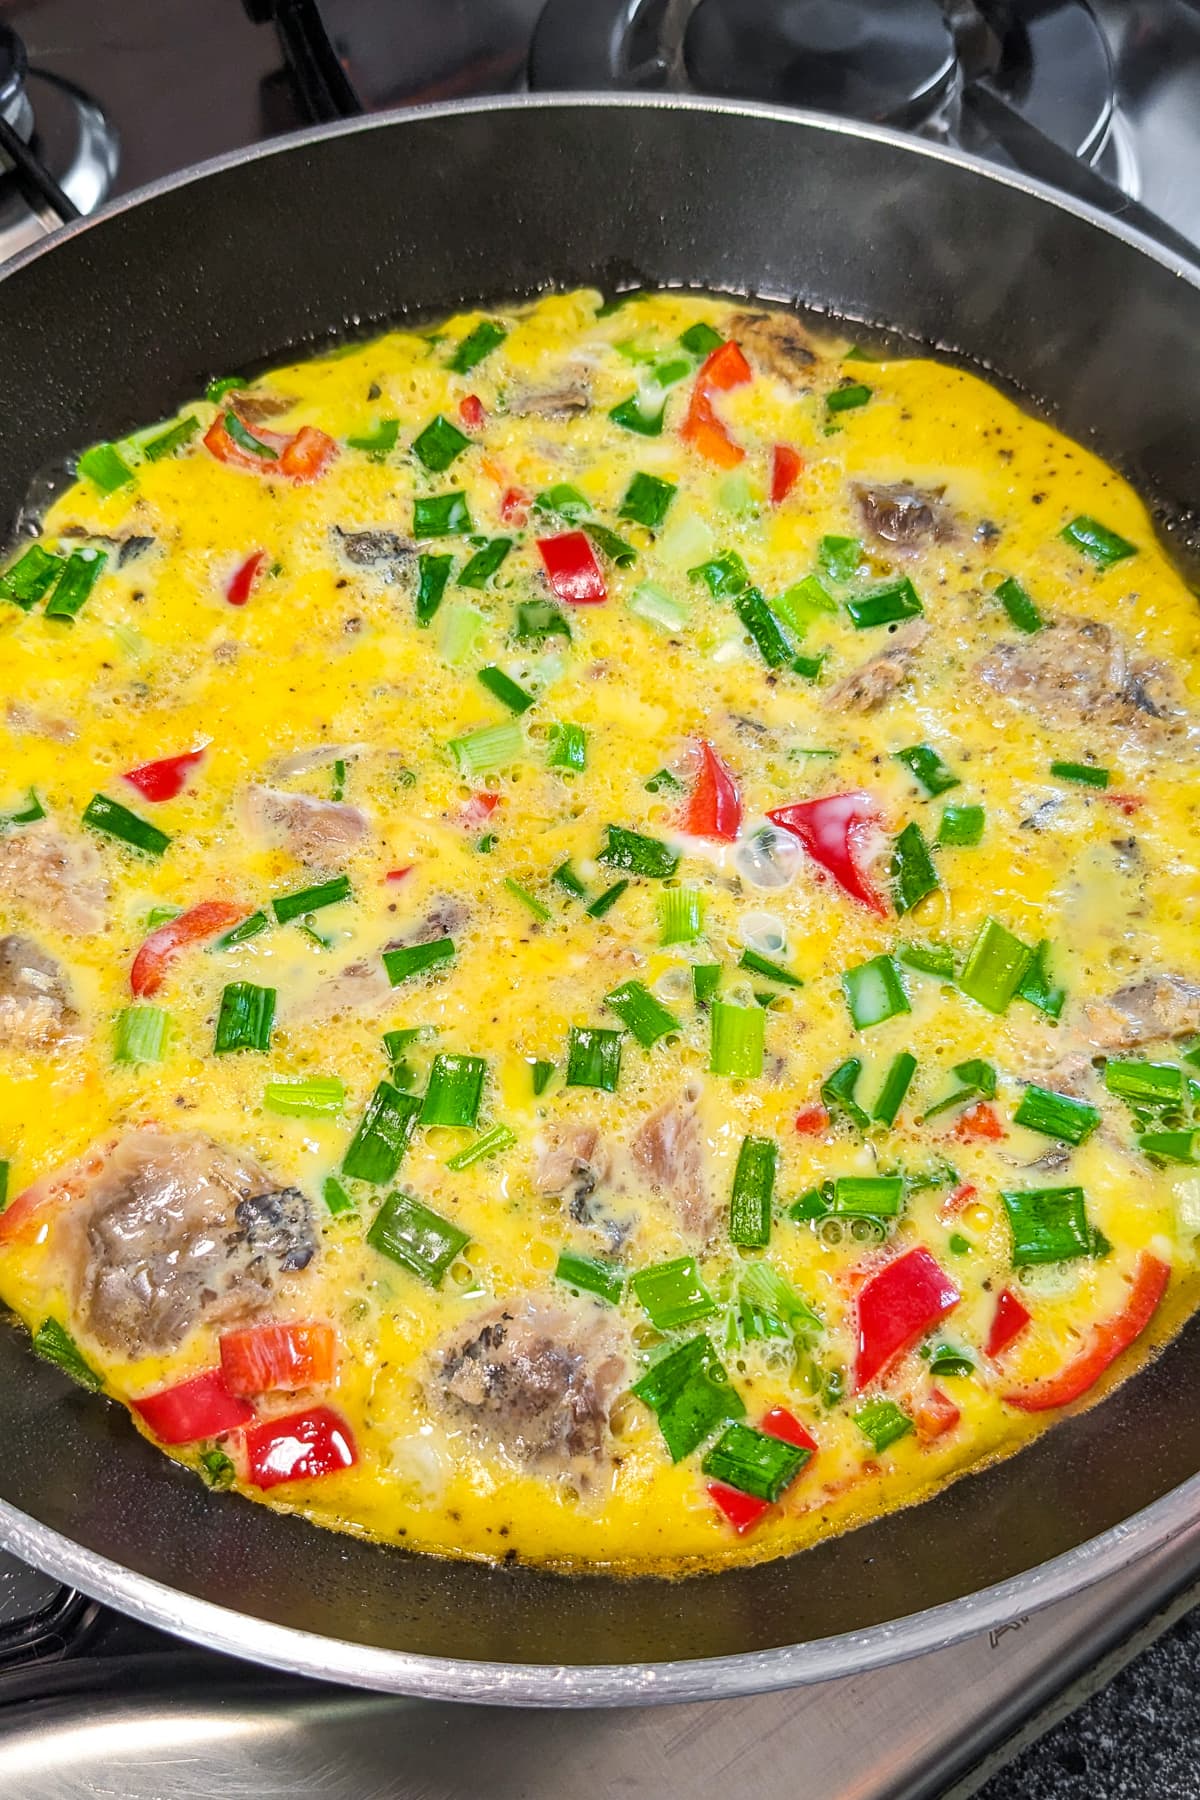 Top view of sardine omelette in a frying pan.